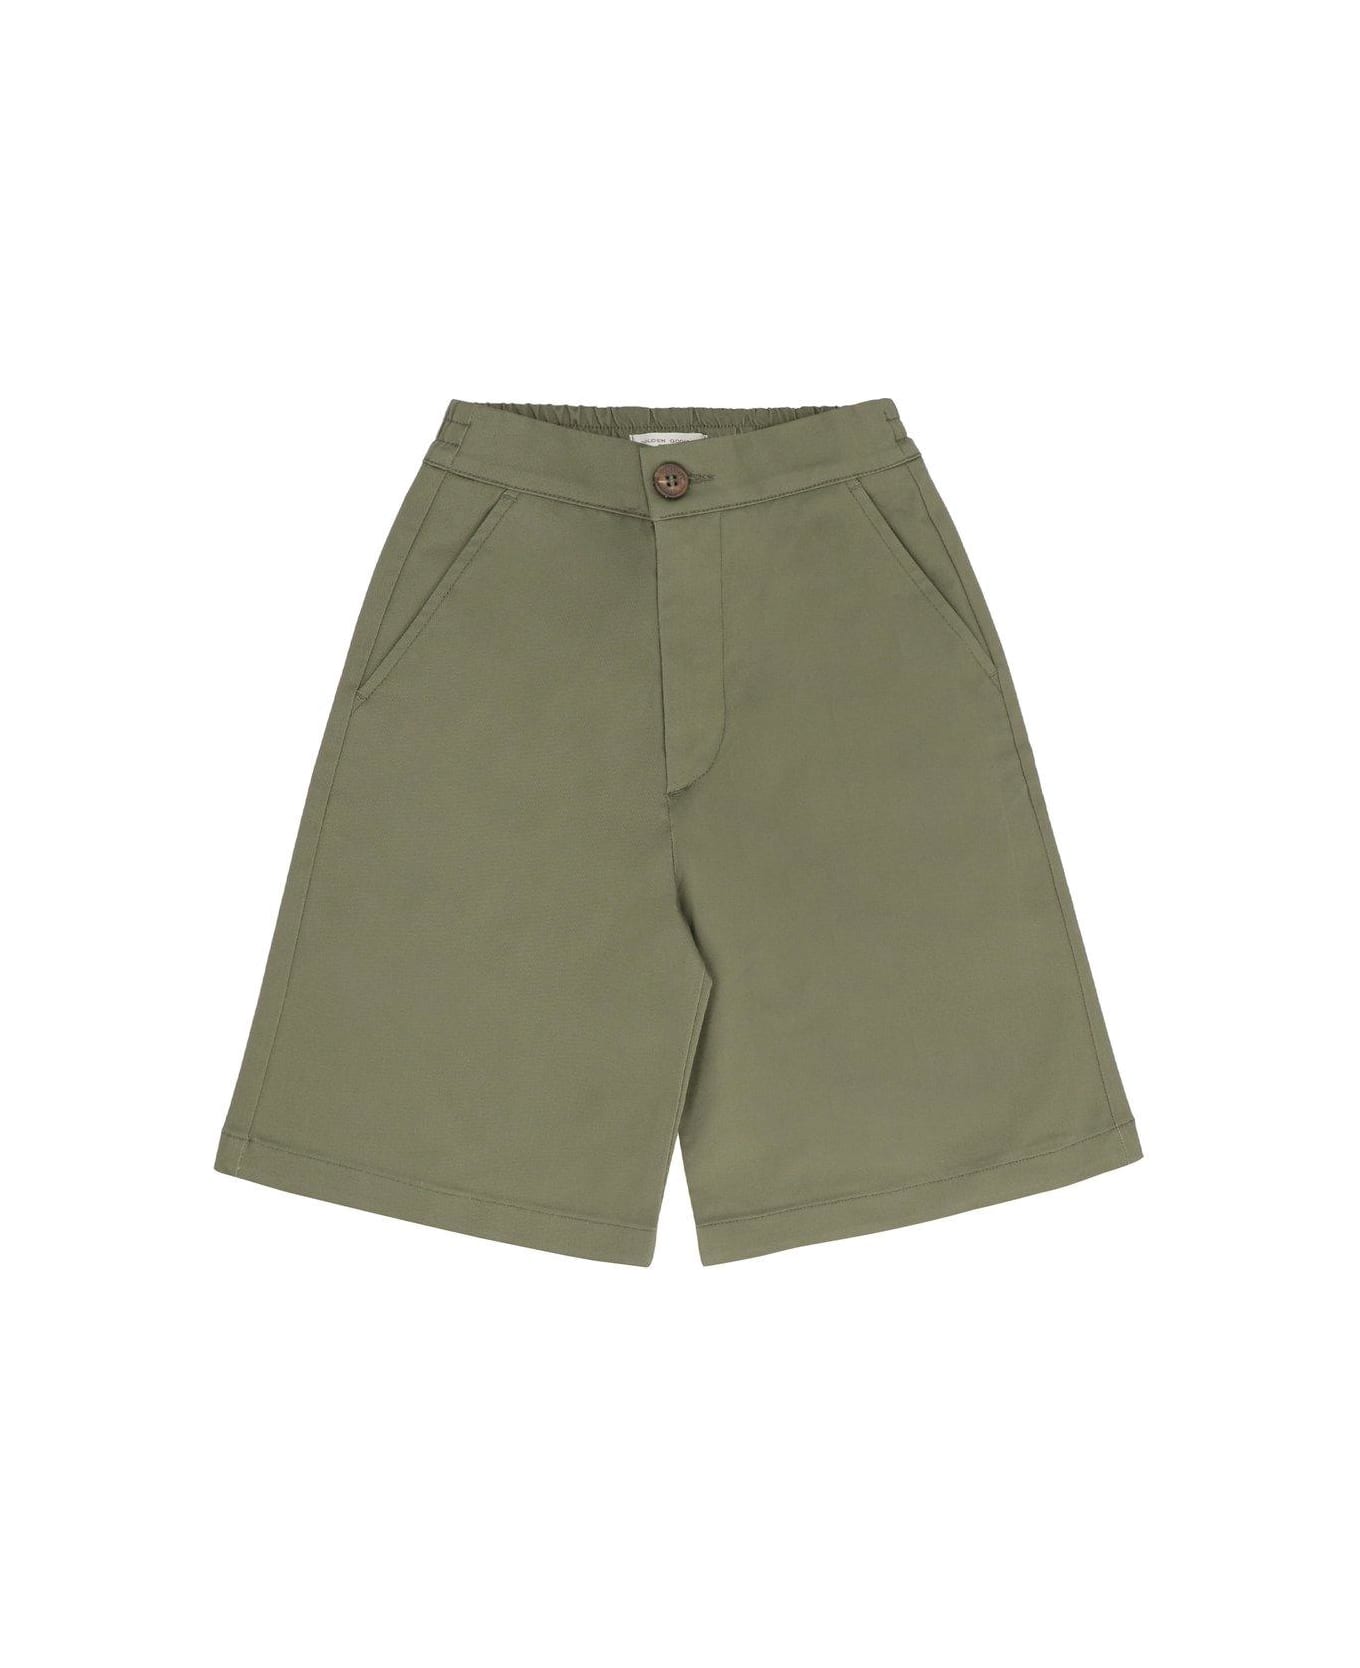 Golden Goose Logo Embroidered Shorts - Ivy green ボトムス